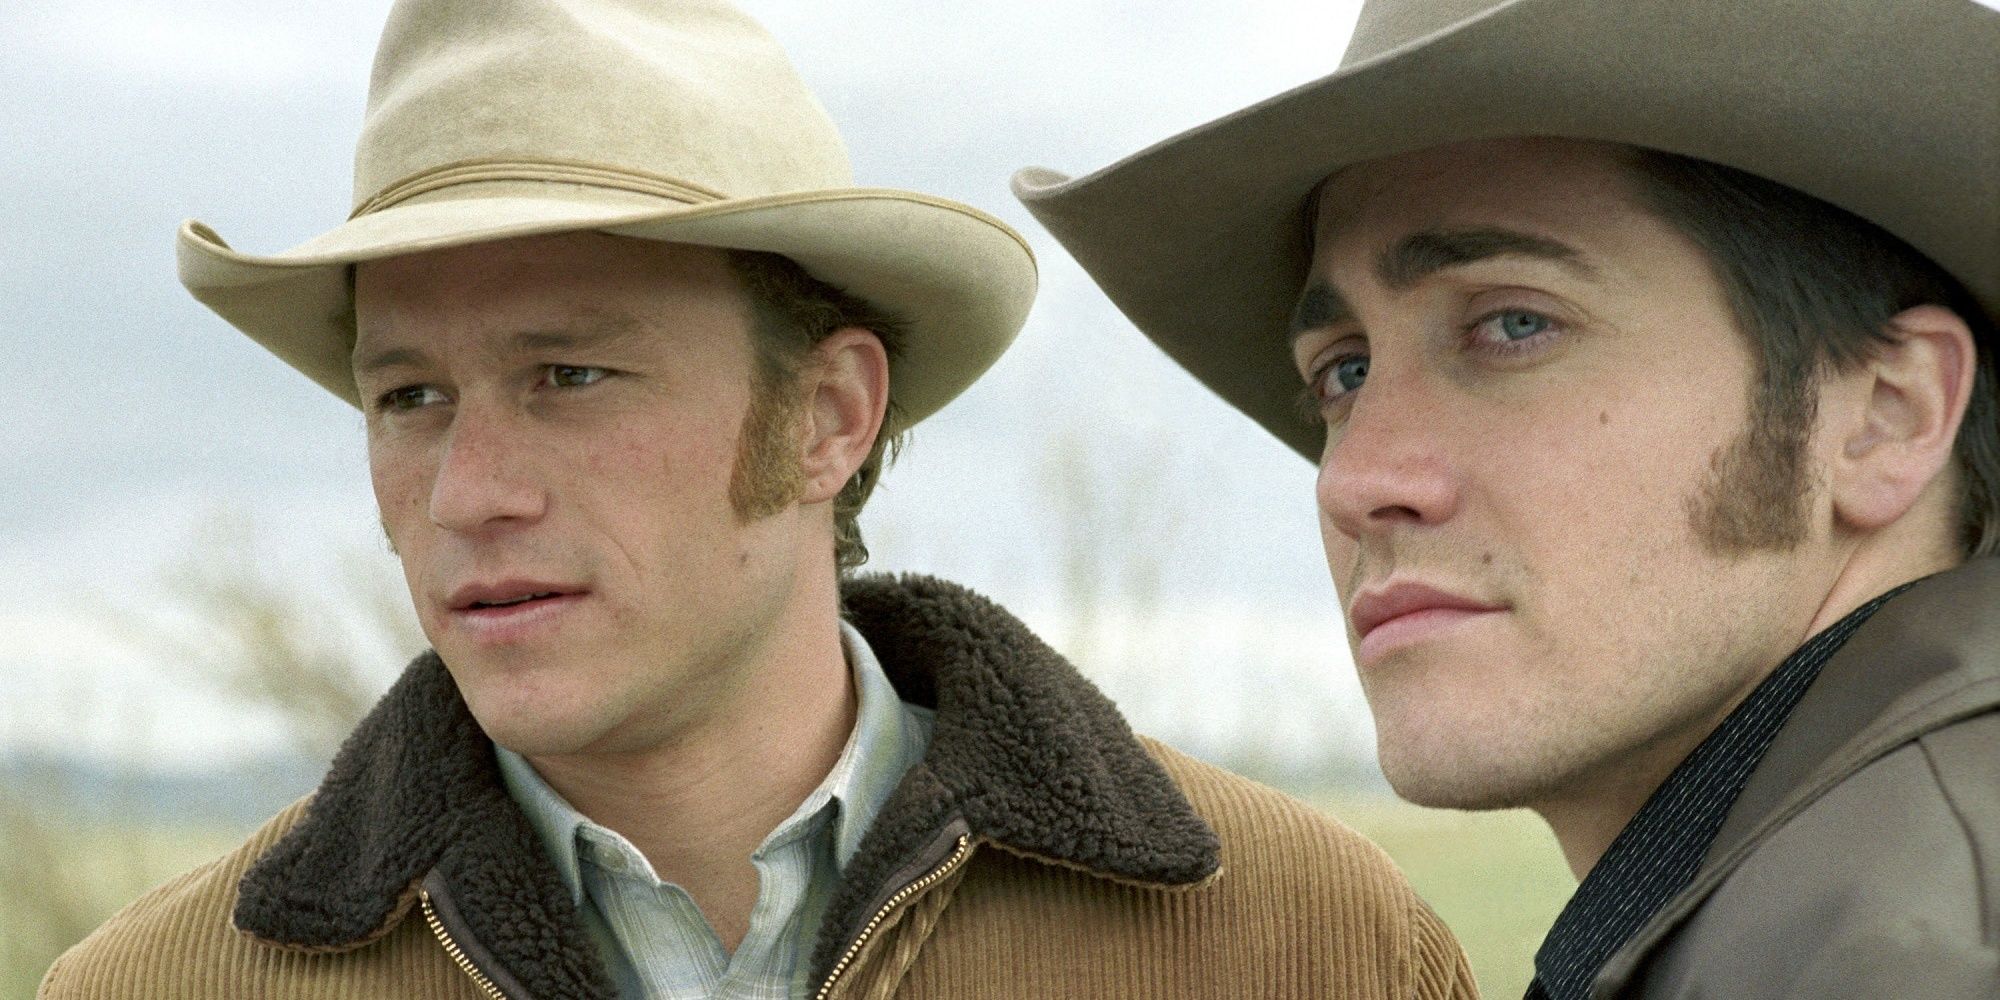 Heath Ledger and Jake Gyllenhaal in cowboy hats together in Brokeback Mountain.